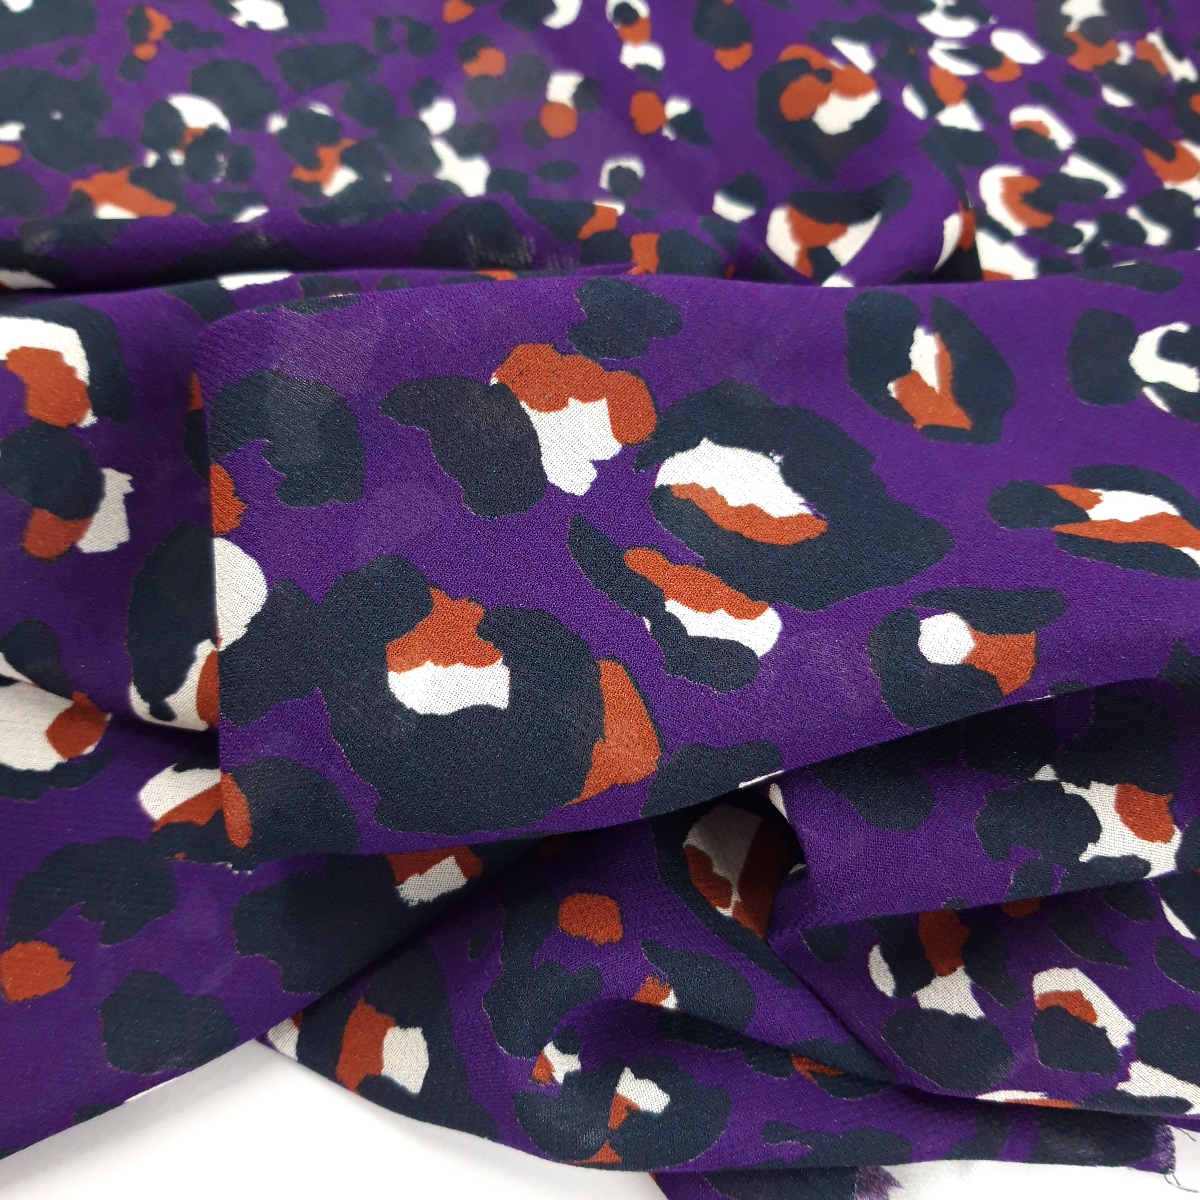 Fabric By The Yard Plumberry Purple Stretch Crepe de Chine